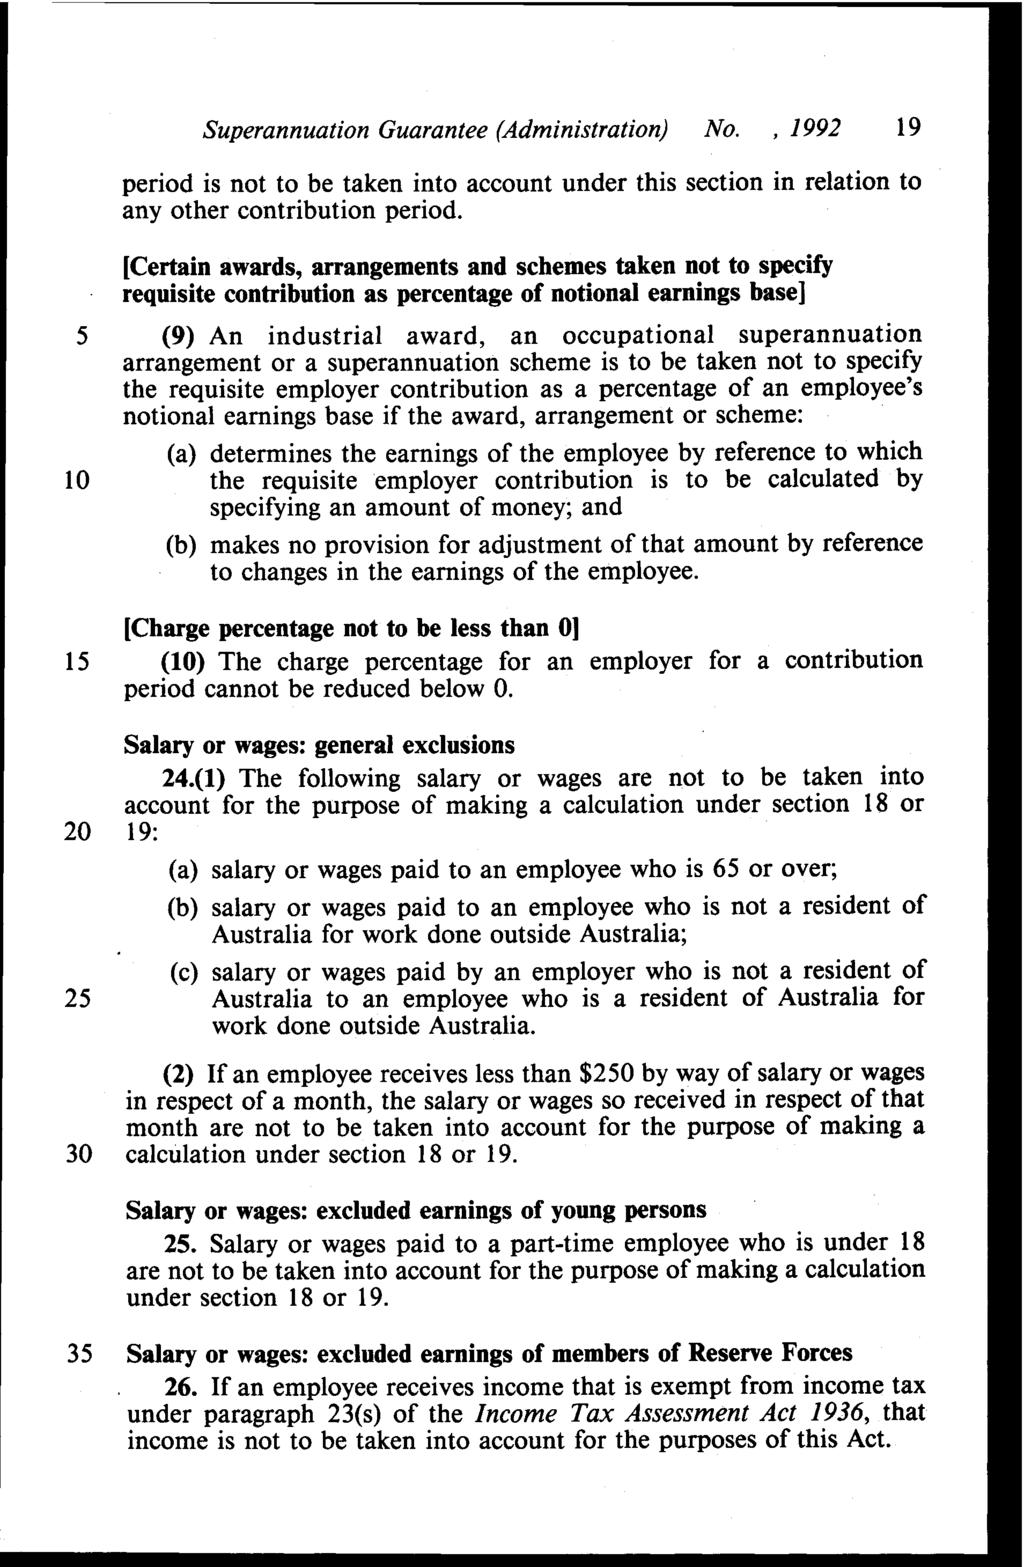 Superannuation Guarantee (Administration) No.,1992 19 period is not to be taken into account under this section in relation to any other contribution period.